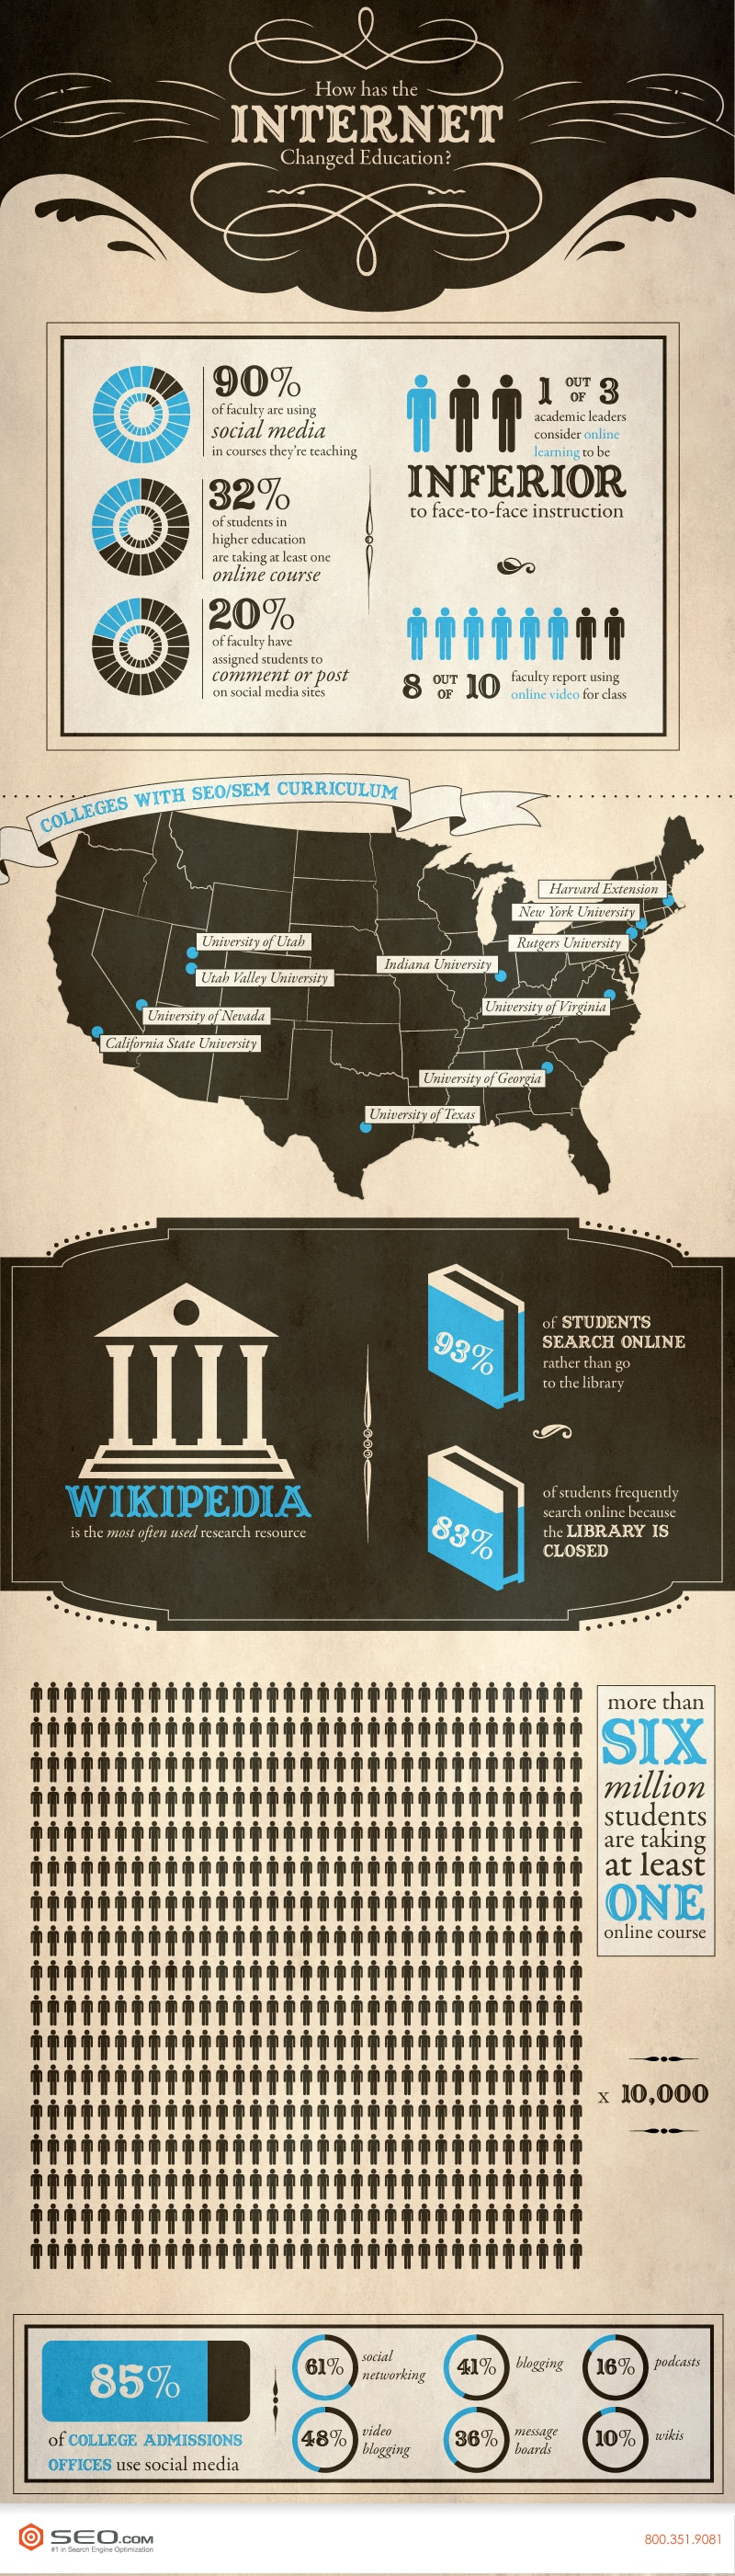 How-Internet-Changed-Education-Infographic